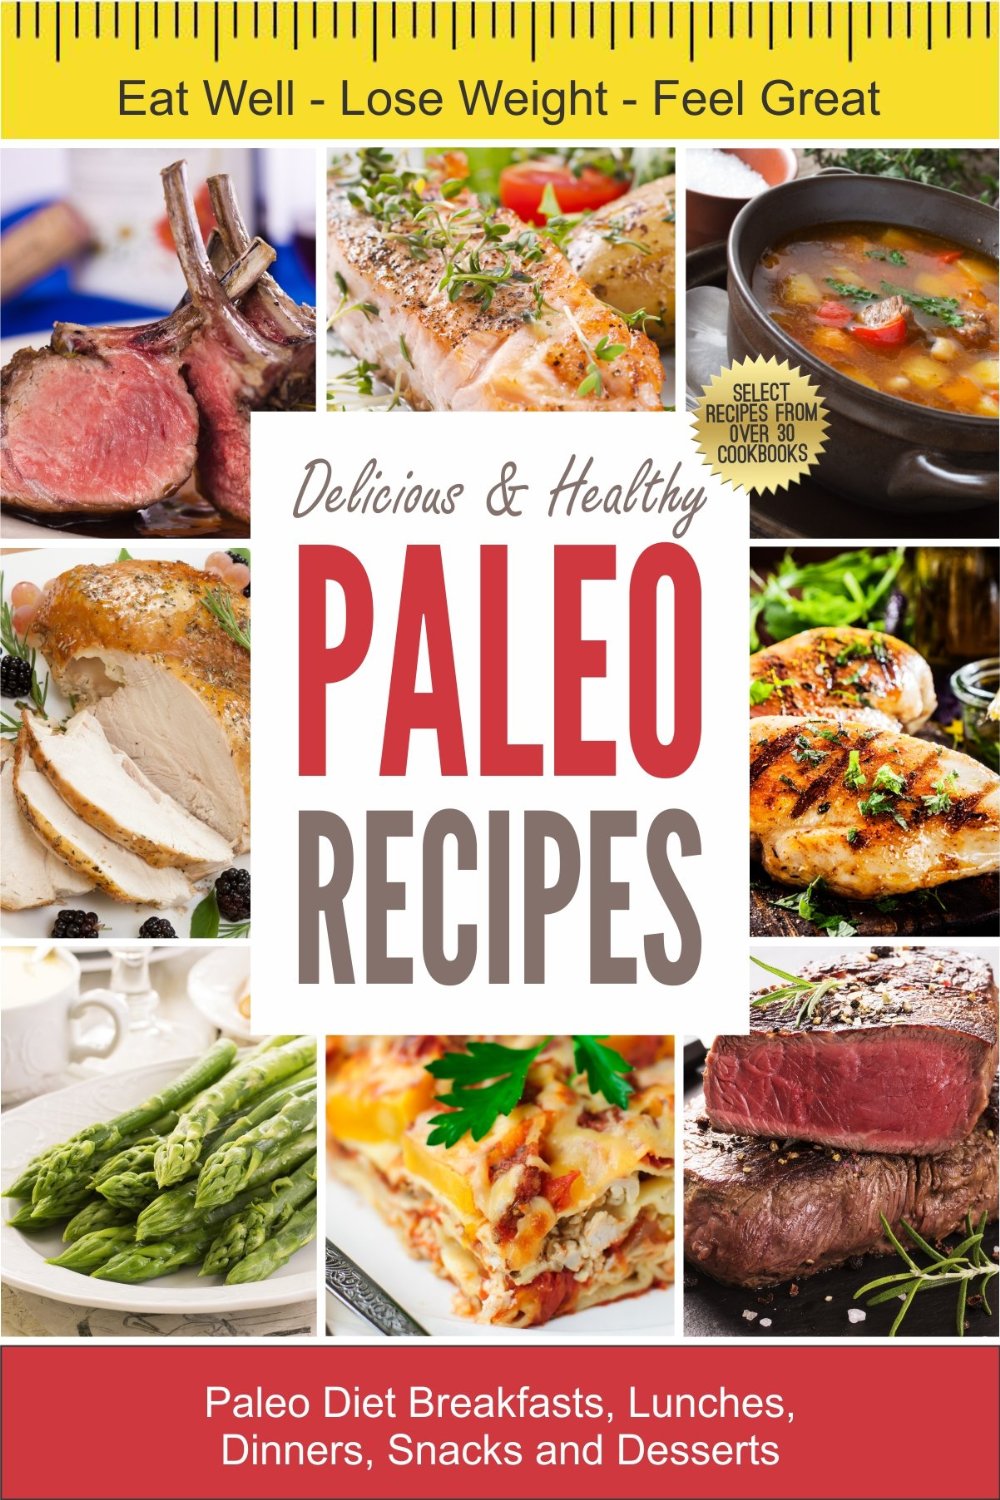 Delicious & Healthy Paleo Recipes: 44 Paleo Diet Breakfasts, Lunches, Dinners, Snacks & Desserts by Jean LeGrand